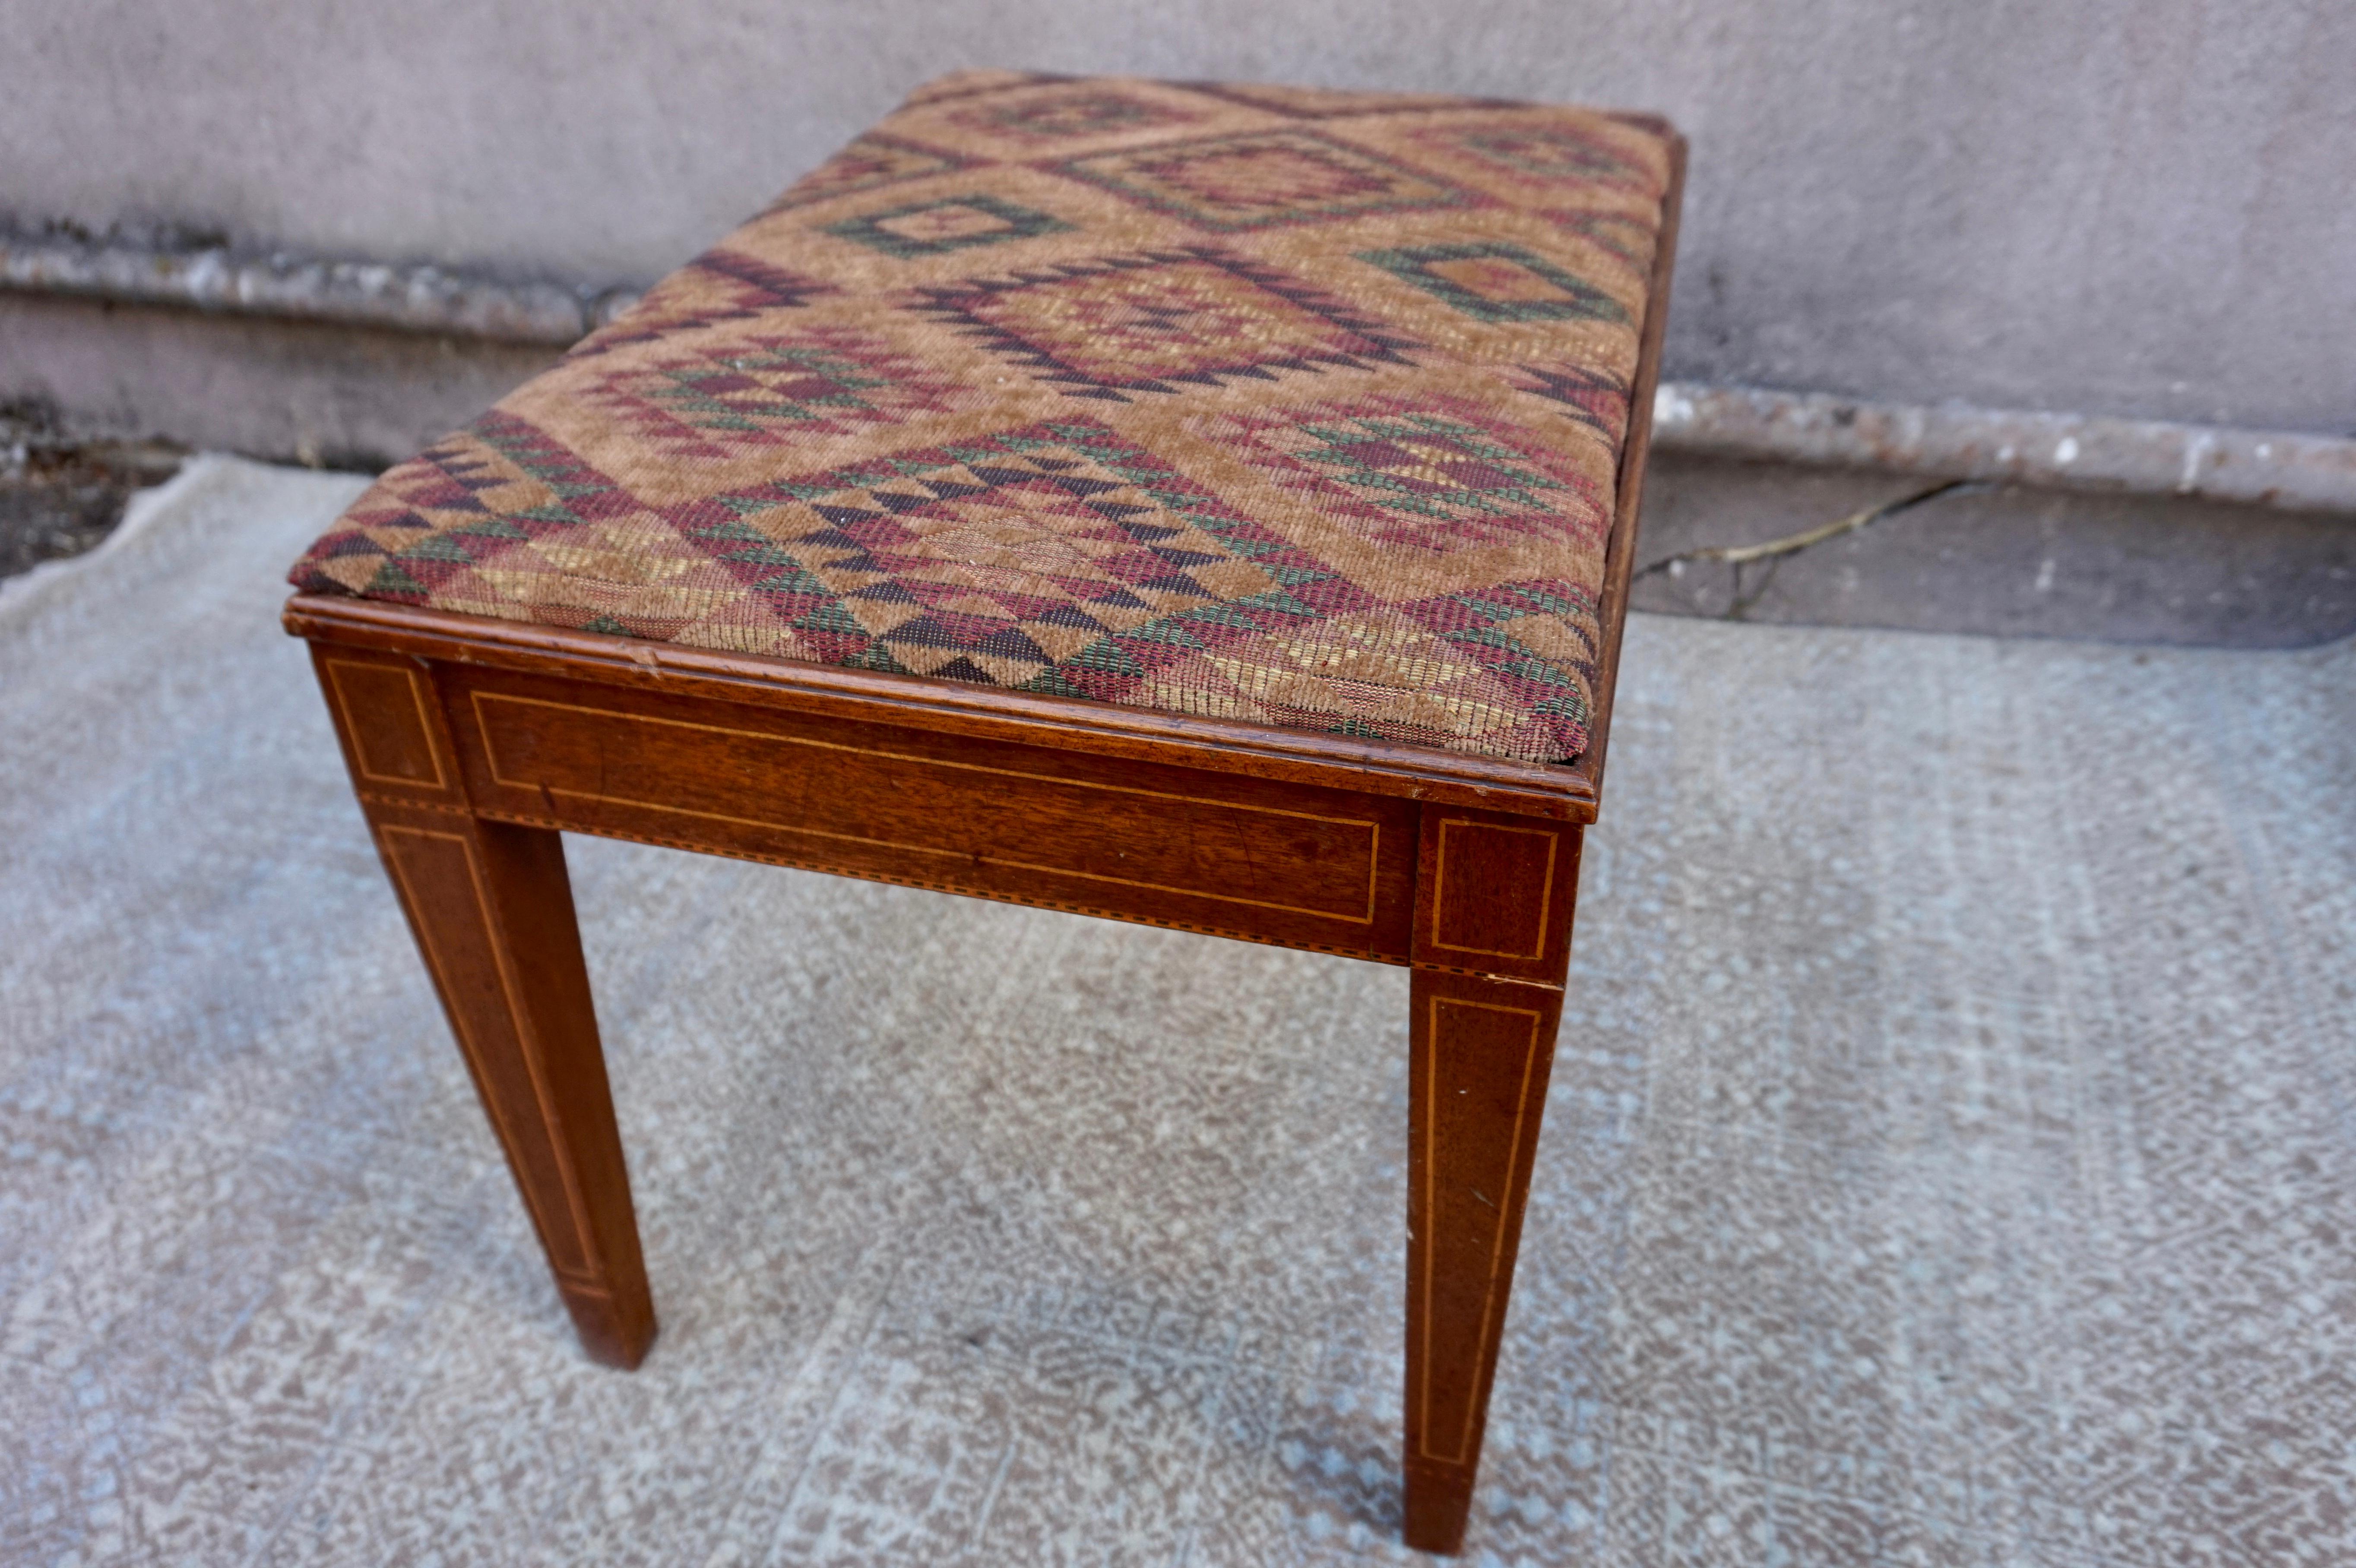 Early 20th Century Edwardian Solid Small Foyer Bench With Satinwood Inlay & Chenille Fabric Seat For Sale